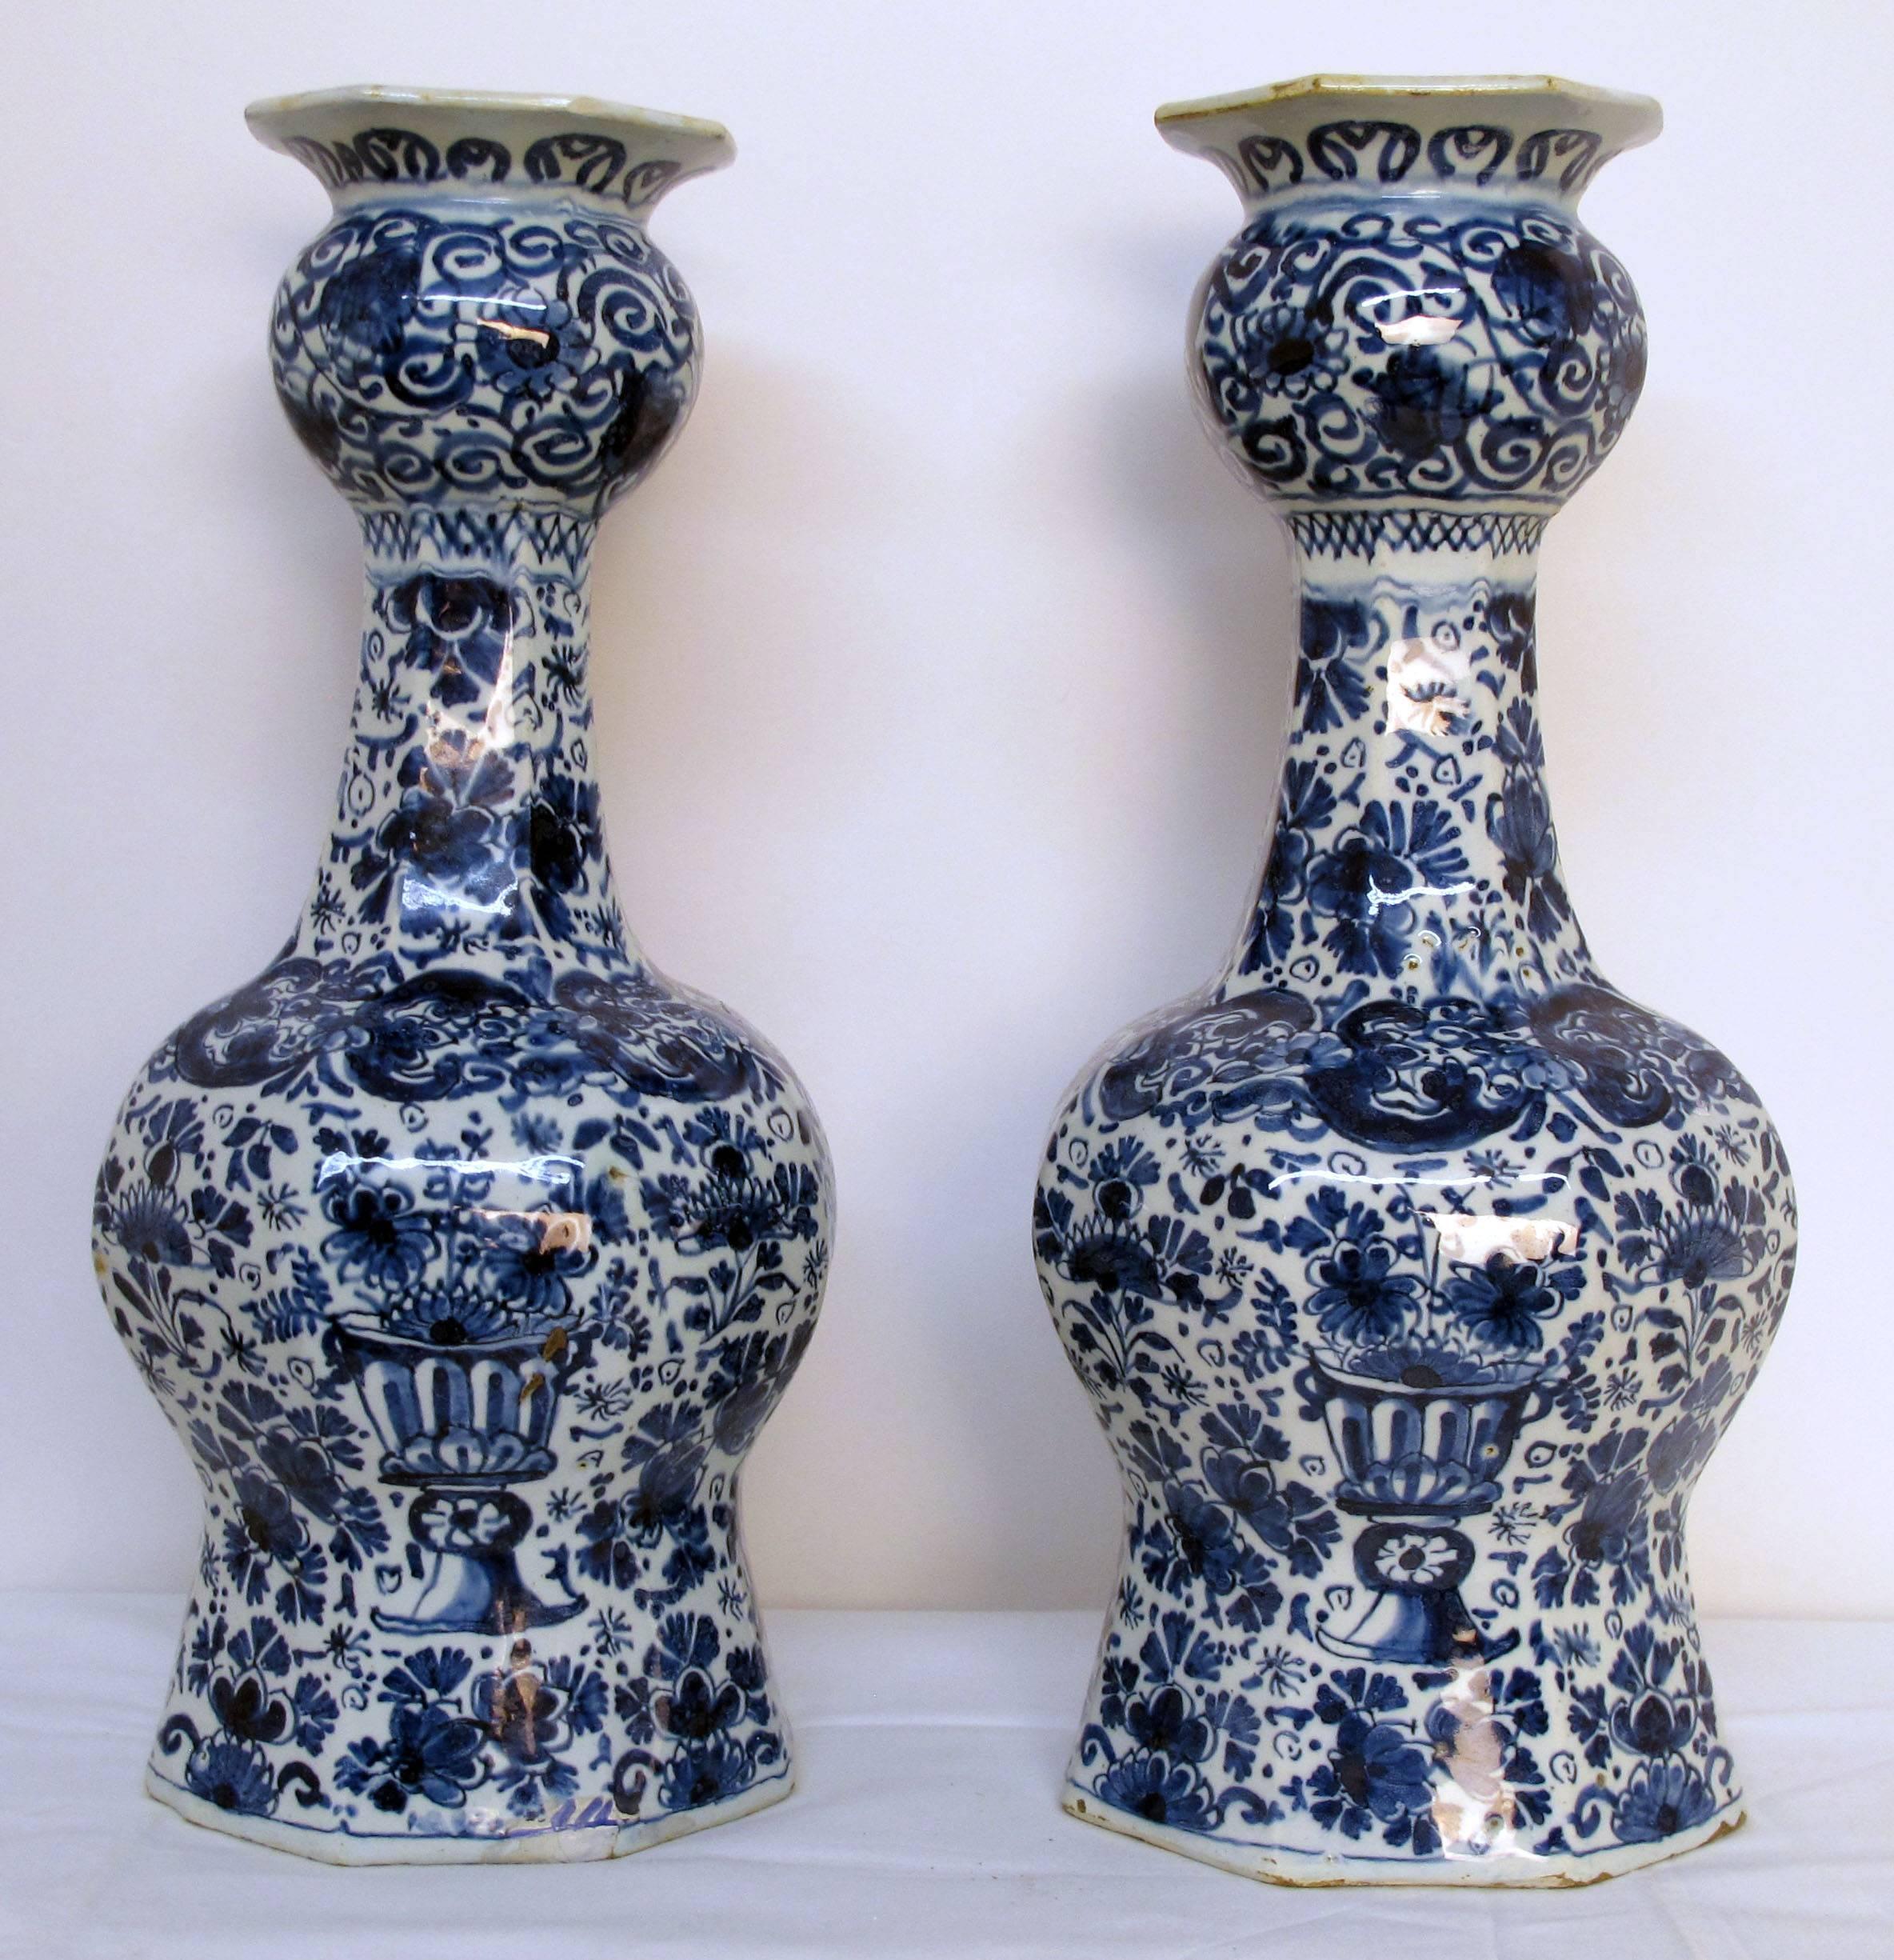 Baroque  Pair 18th Century Delft Faience Blue and White Vases